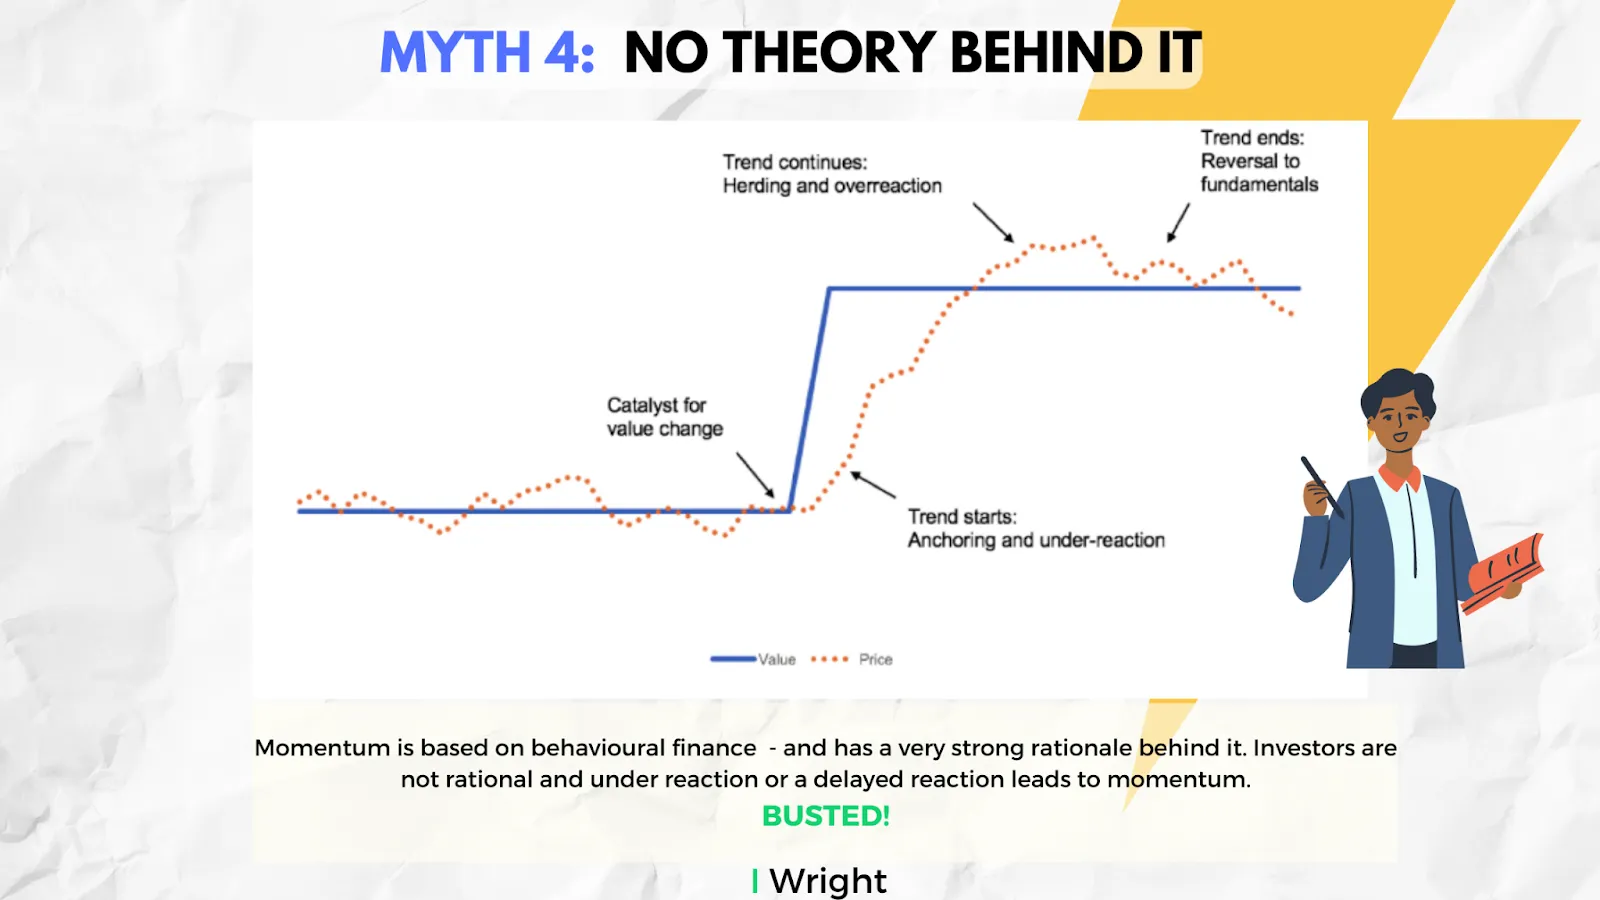 Top Myths About Momentum Investing - Busted!